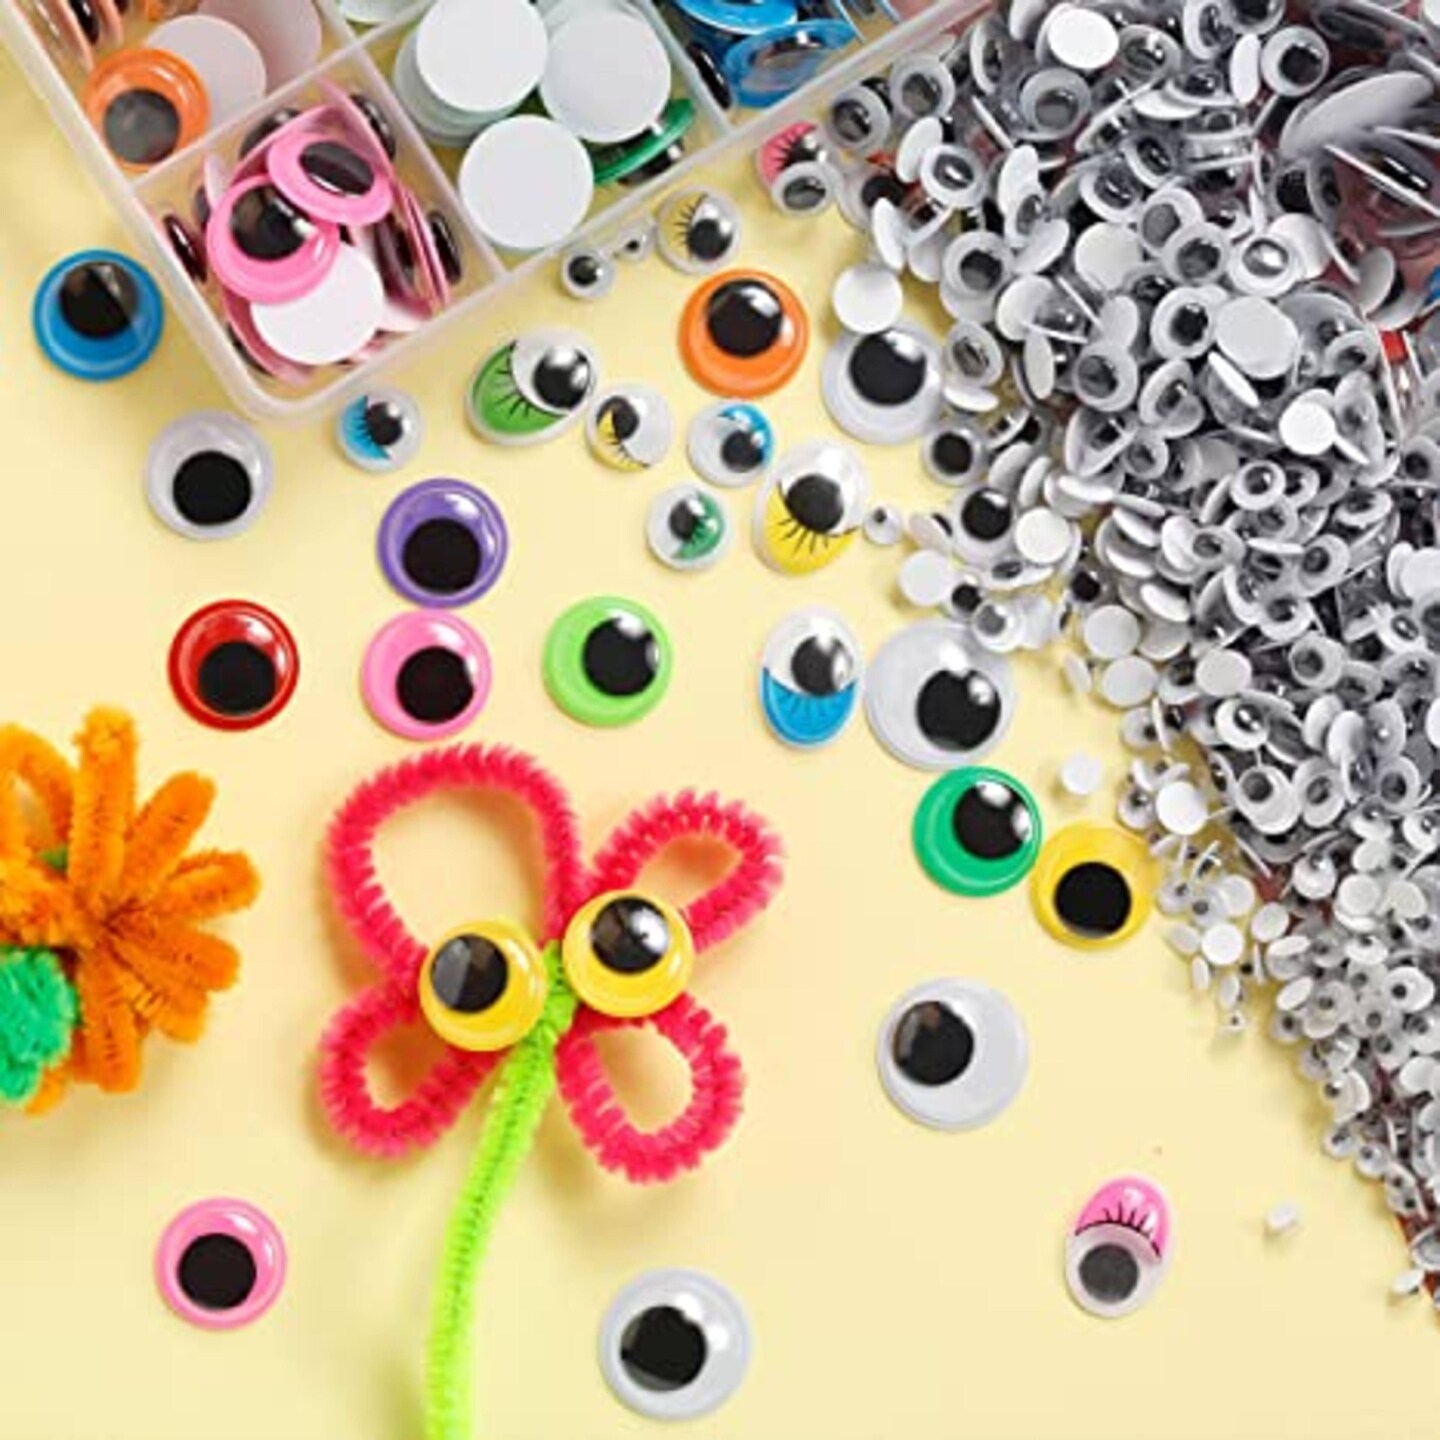 Incraftables Googly Eyes Self Adhesive 1680 pcs Set, 2000 Pcs Pom Poms with Googly  Eyes & Glue Stick & 600pcs Pipe Cleaners Chenille for DIY Arts, Craft, Hats  & Decorations. Best for